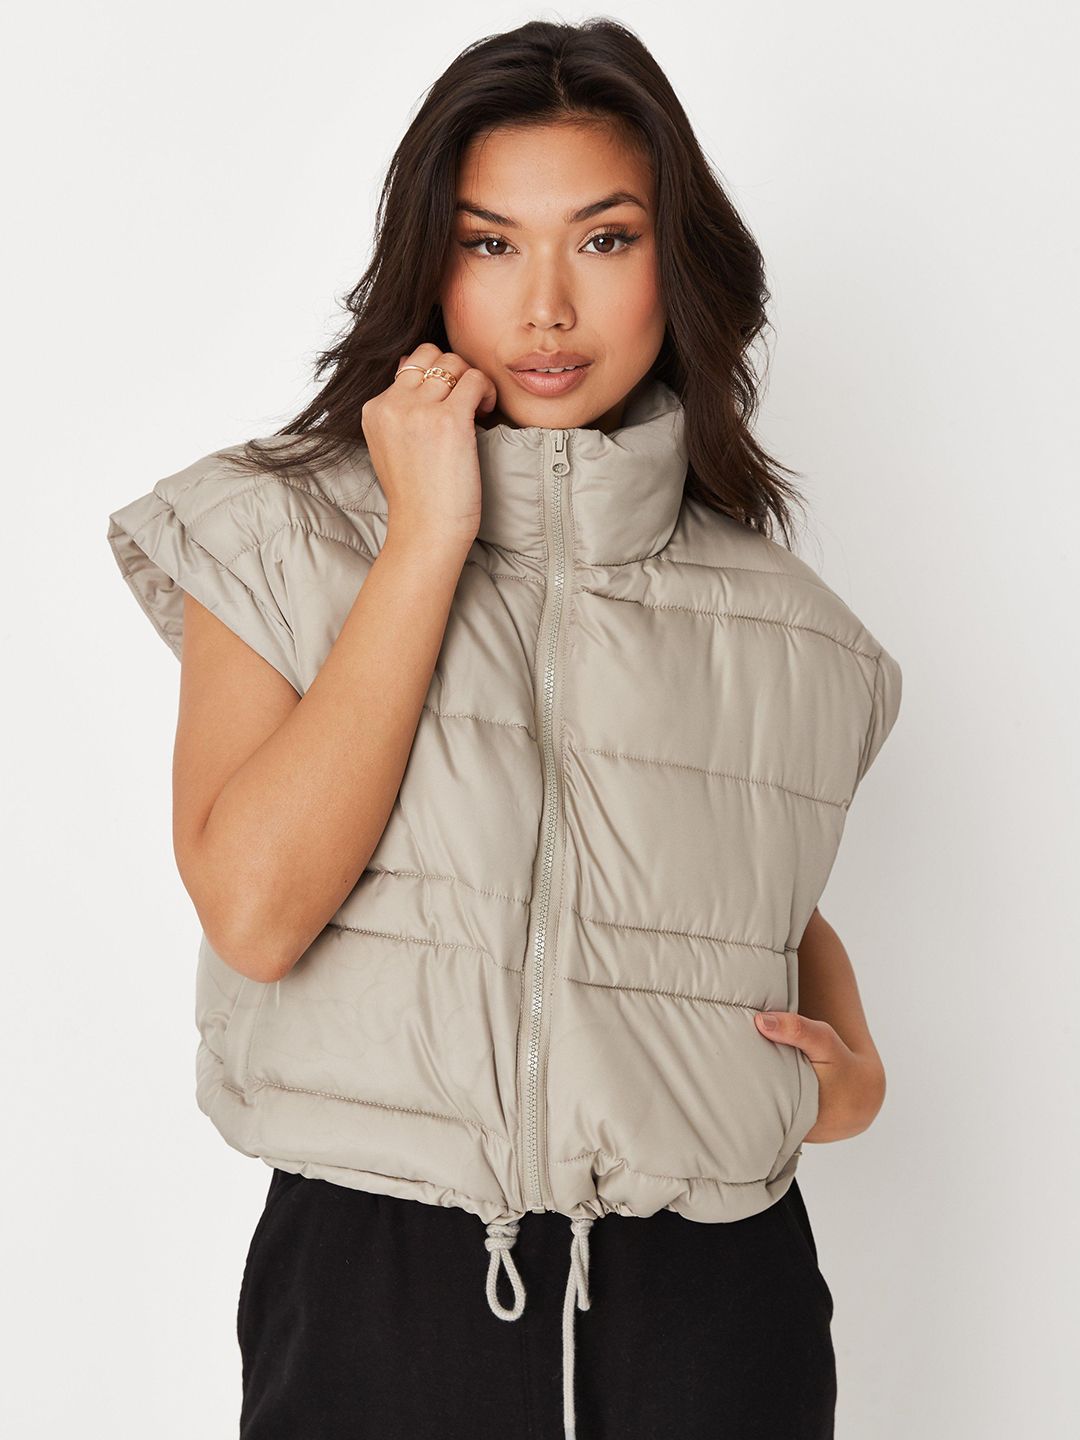 Missguided Women Beige Solid Puffer Gilet Jacket Price in India